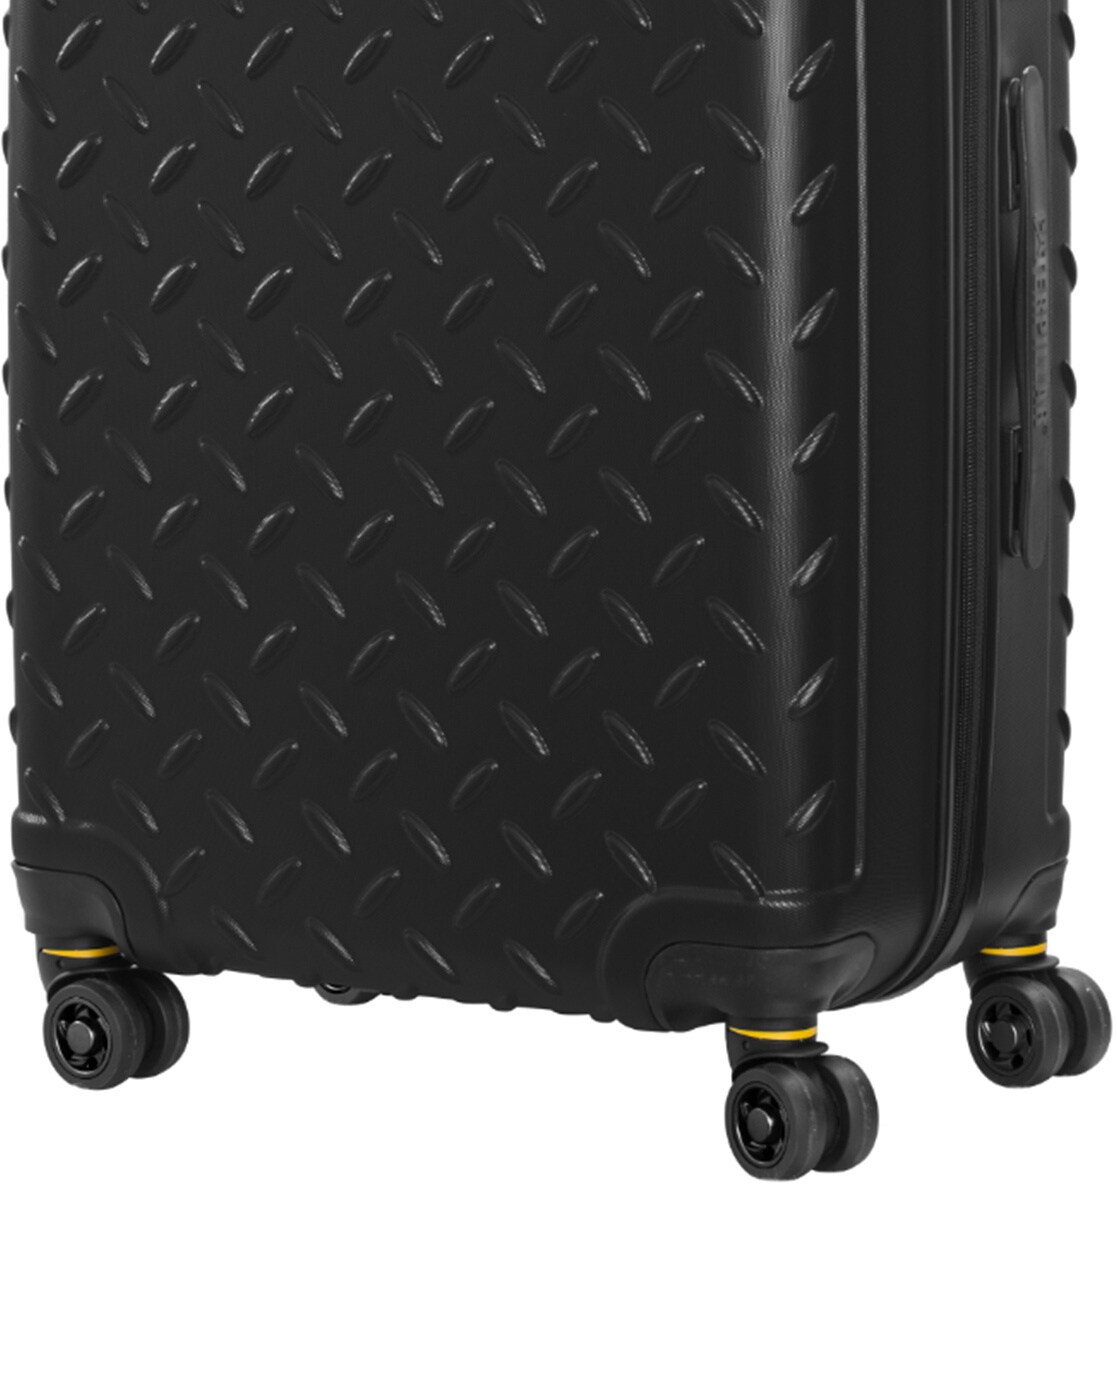 Industrial Plate 75 cms ABS Large Check-in Hard Luggage Trolley Travel Bag